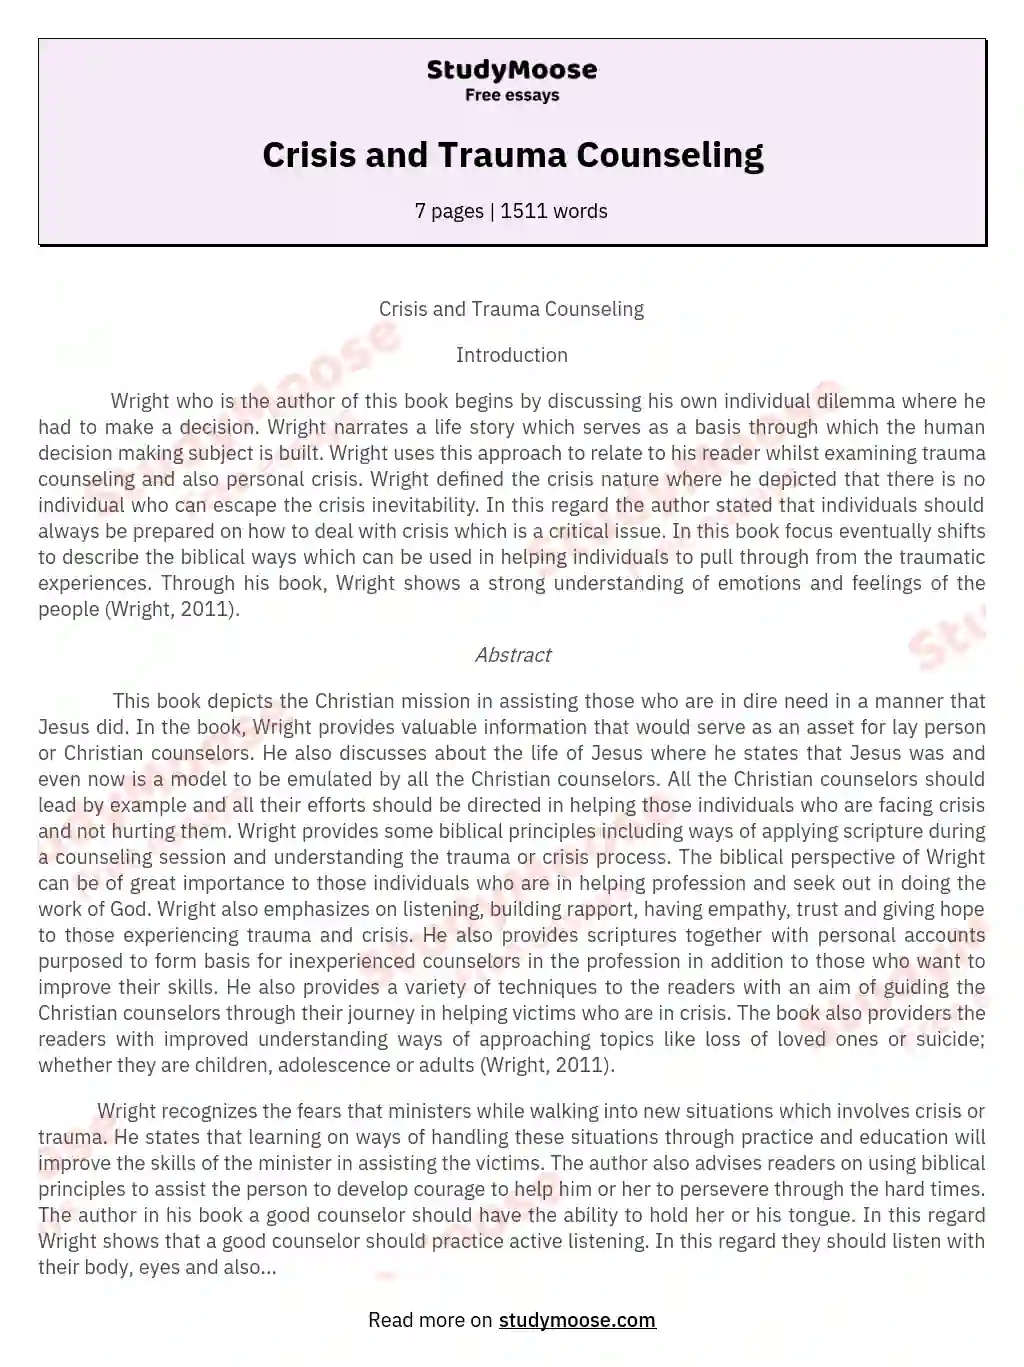 Crisis and Trauma Counseling essay